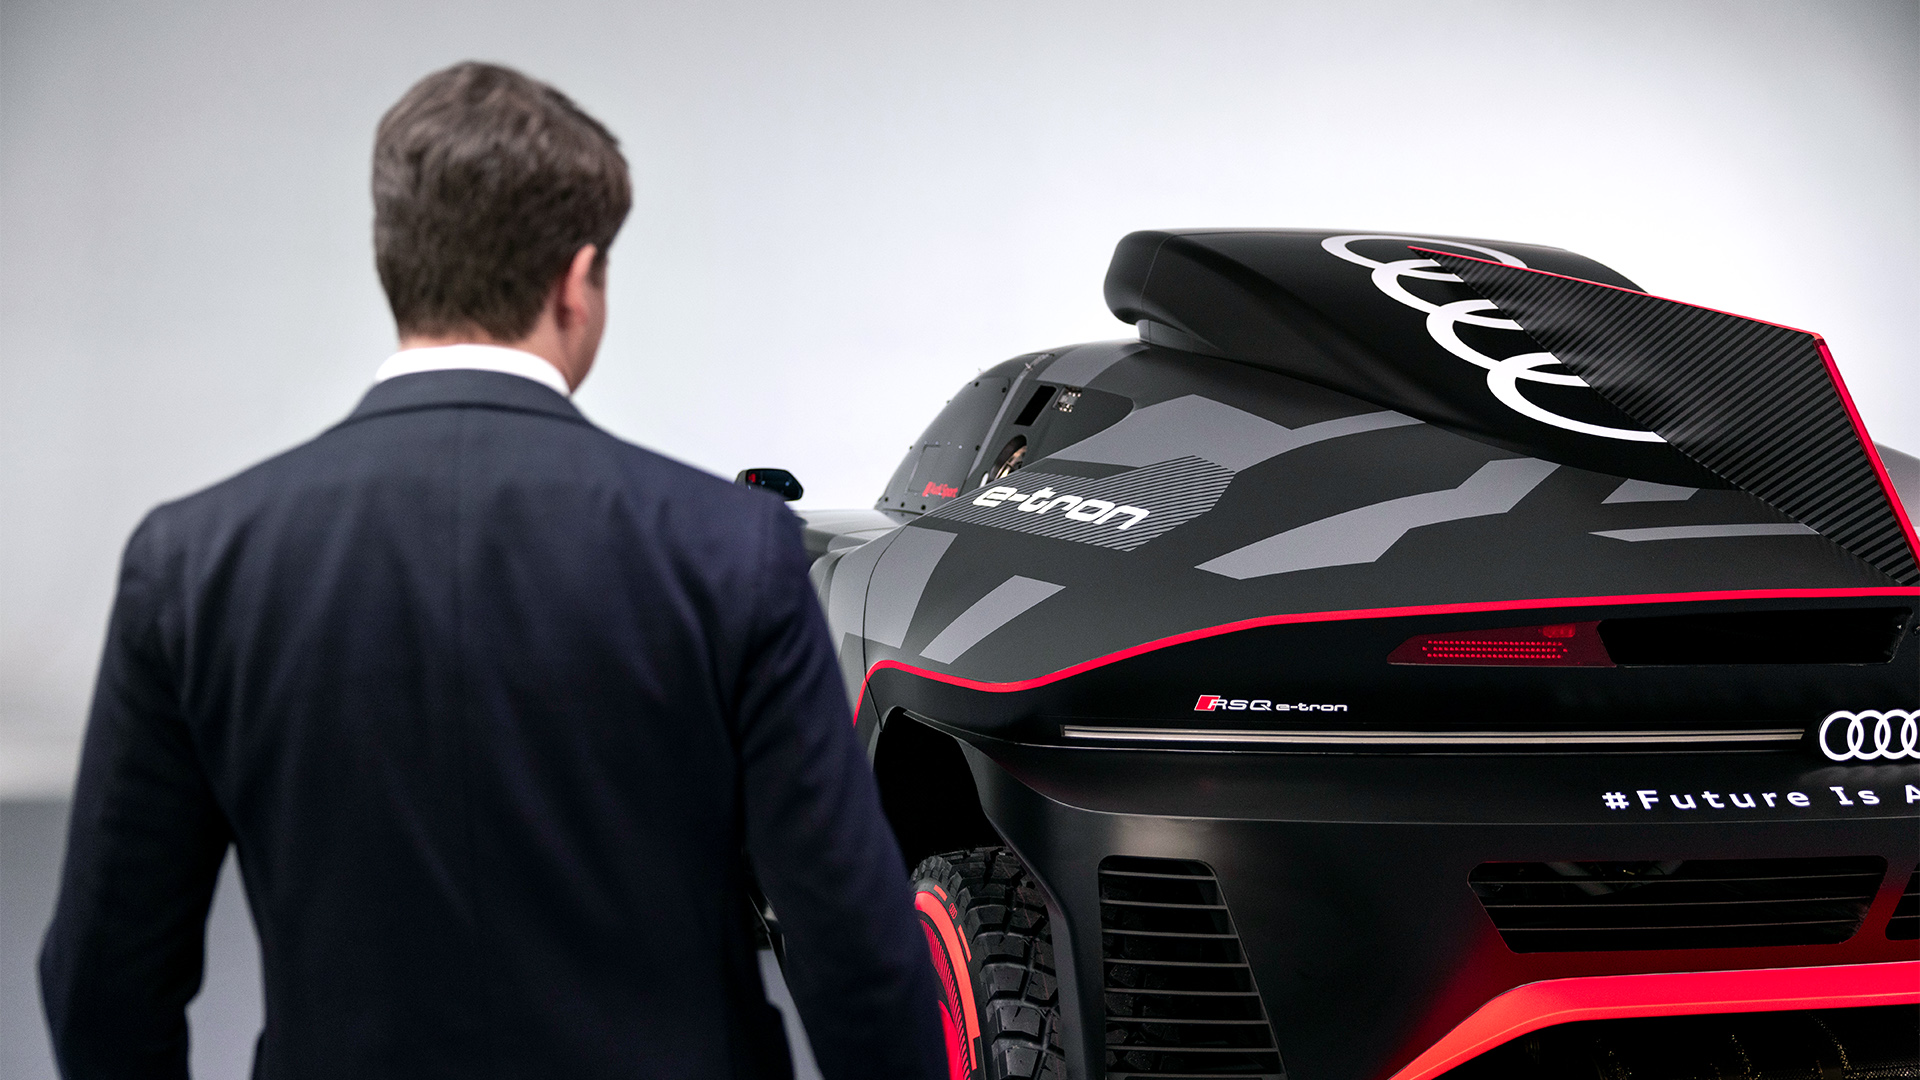 Julius Seebach standing with his back to the camera, to the left of the Audi RS Q e-tron{ft_rs-q-e-tron}.